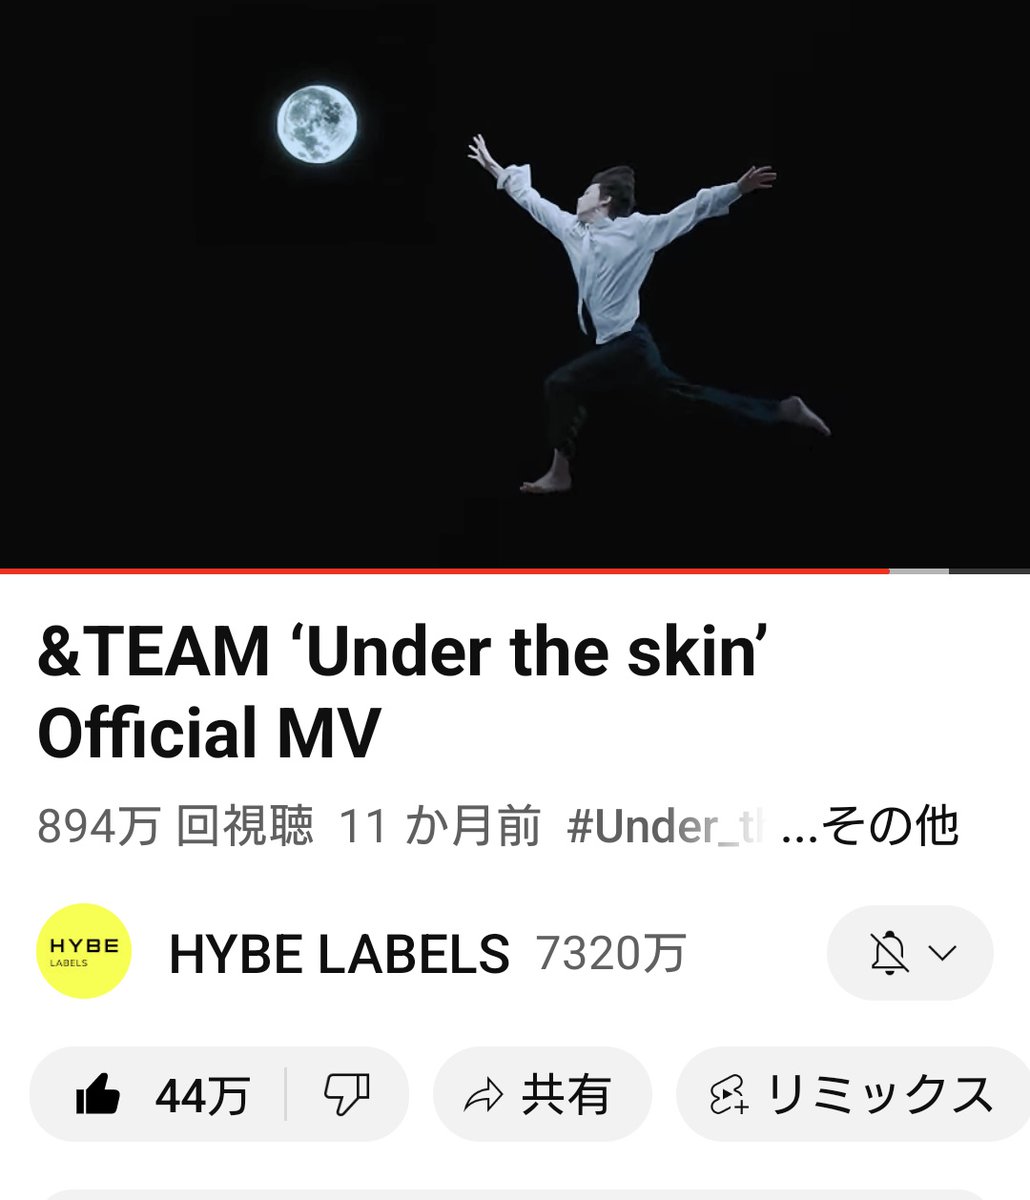 @andTEAM_Stream @andTEAMSTREAM @HYBEJPBoyStream 1000万回頑張ろう🫶✨

#andTEAM  #앤팀
 #Under_the_skin 
 #FirstHowling_ME
 #andTEAM_Roadto10M